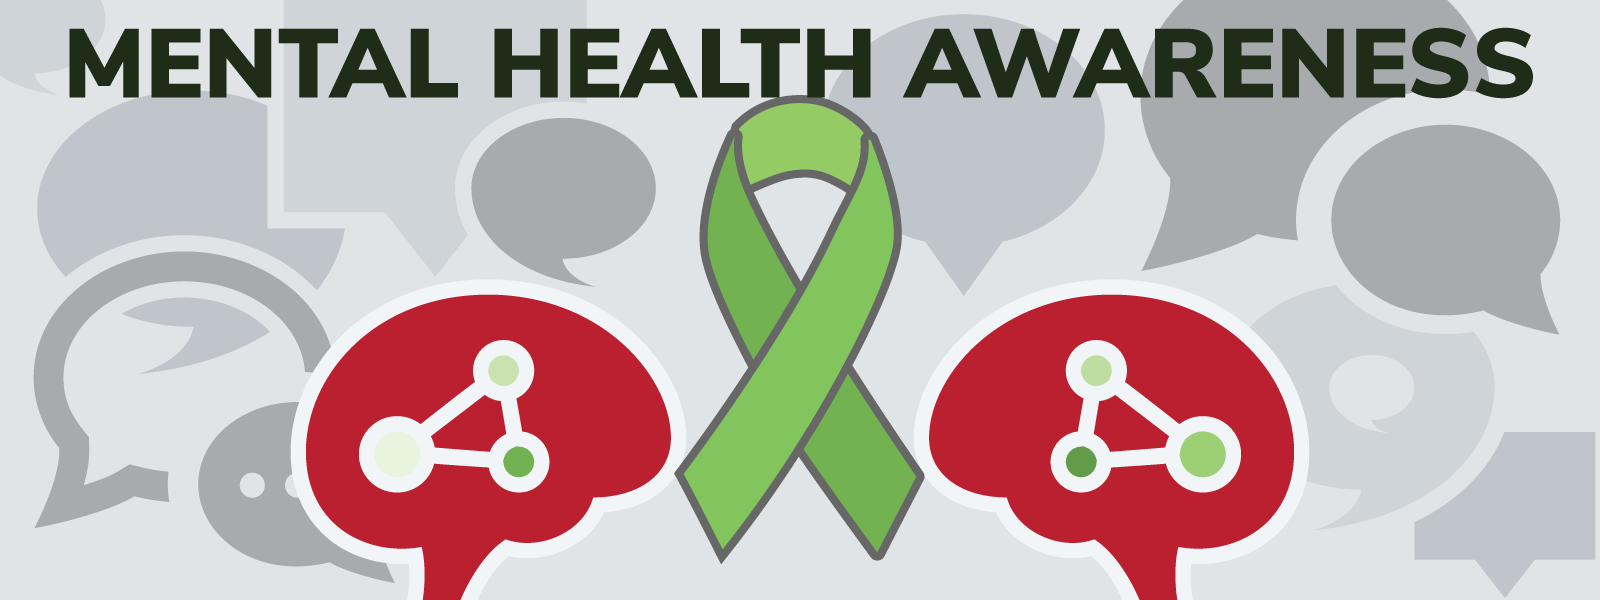 "Mental Health Awareness" a green ribbon stands in front of two red brain illustrations with grey speech bubbles floating behind them.